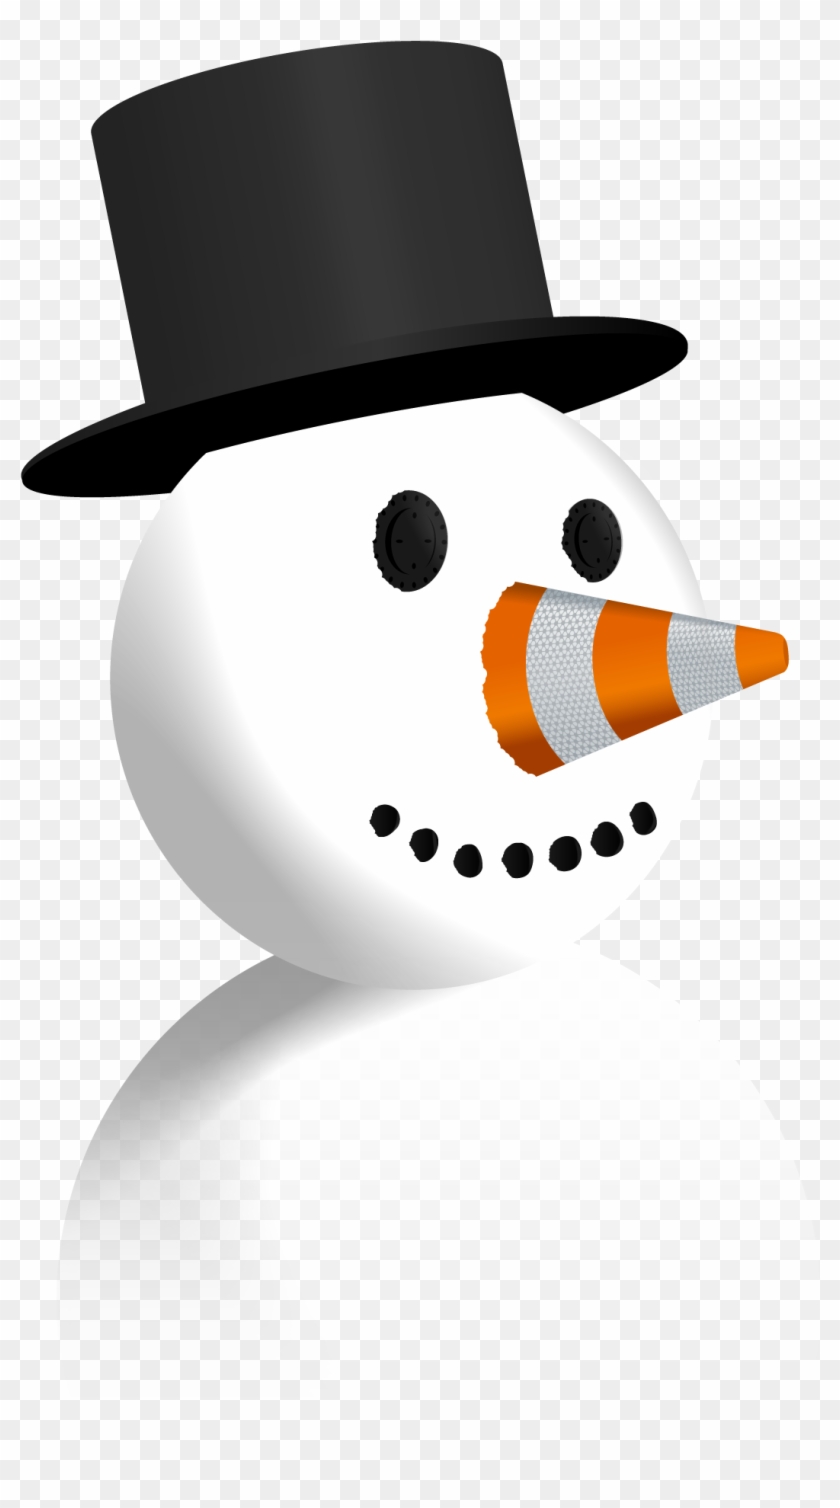 Snowman With Cone Nose - Snowman Clipart #573165